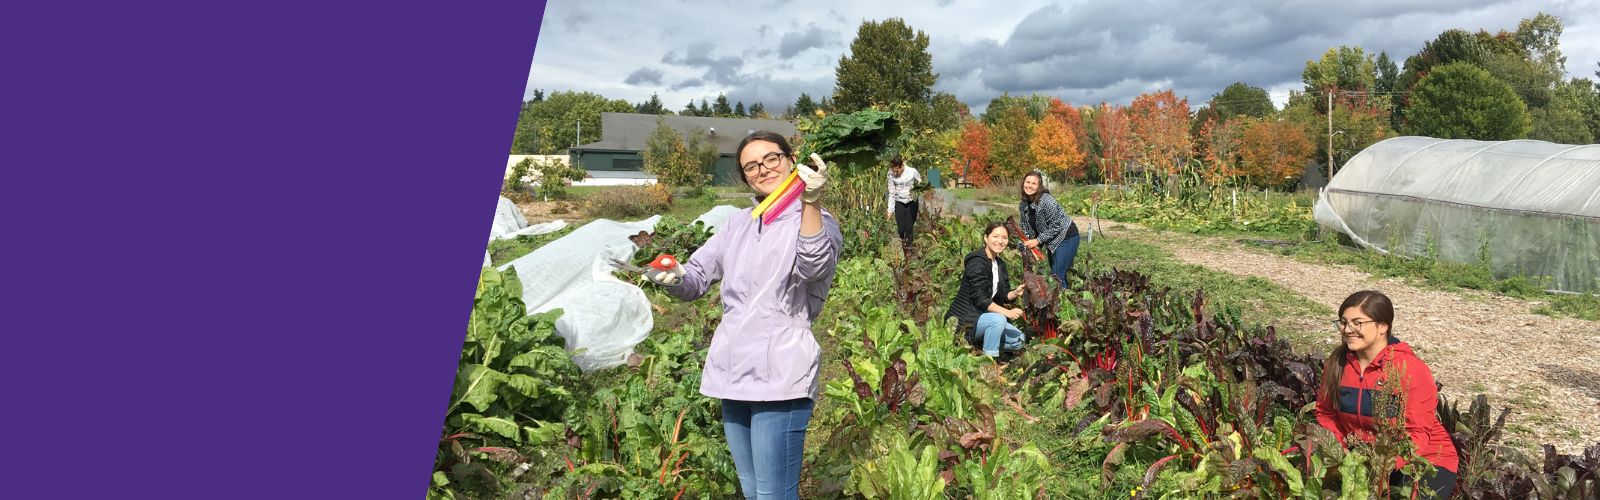 Students in a NUTR 302 course working at UW Farm harvesting Swiss chard